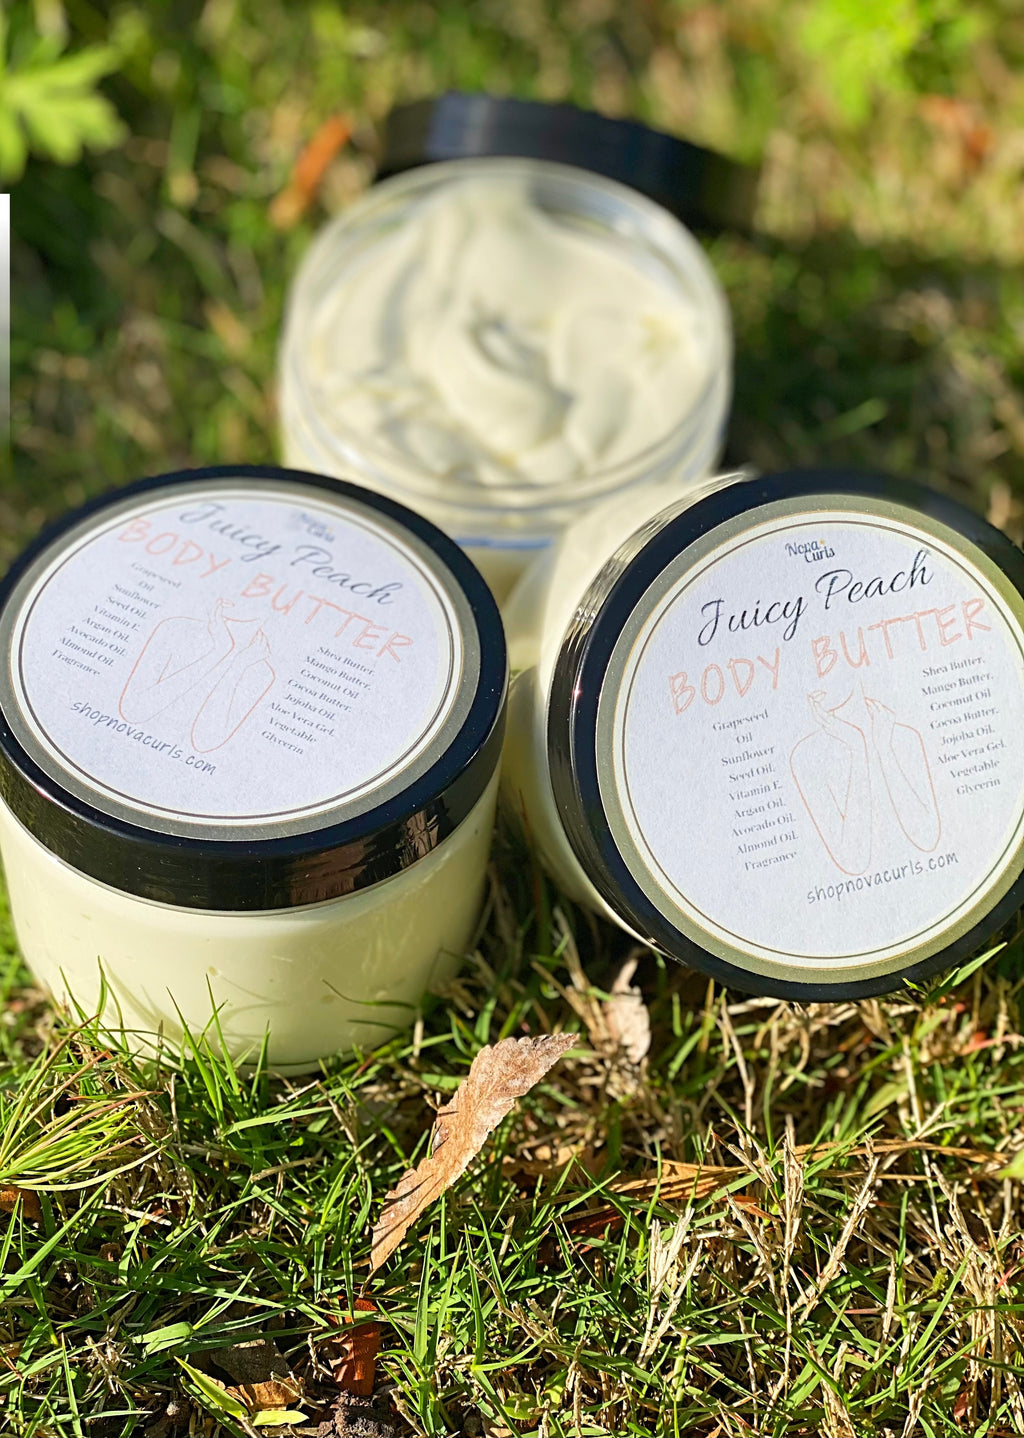 “Juicy Peach" All Natural Body Butter